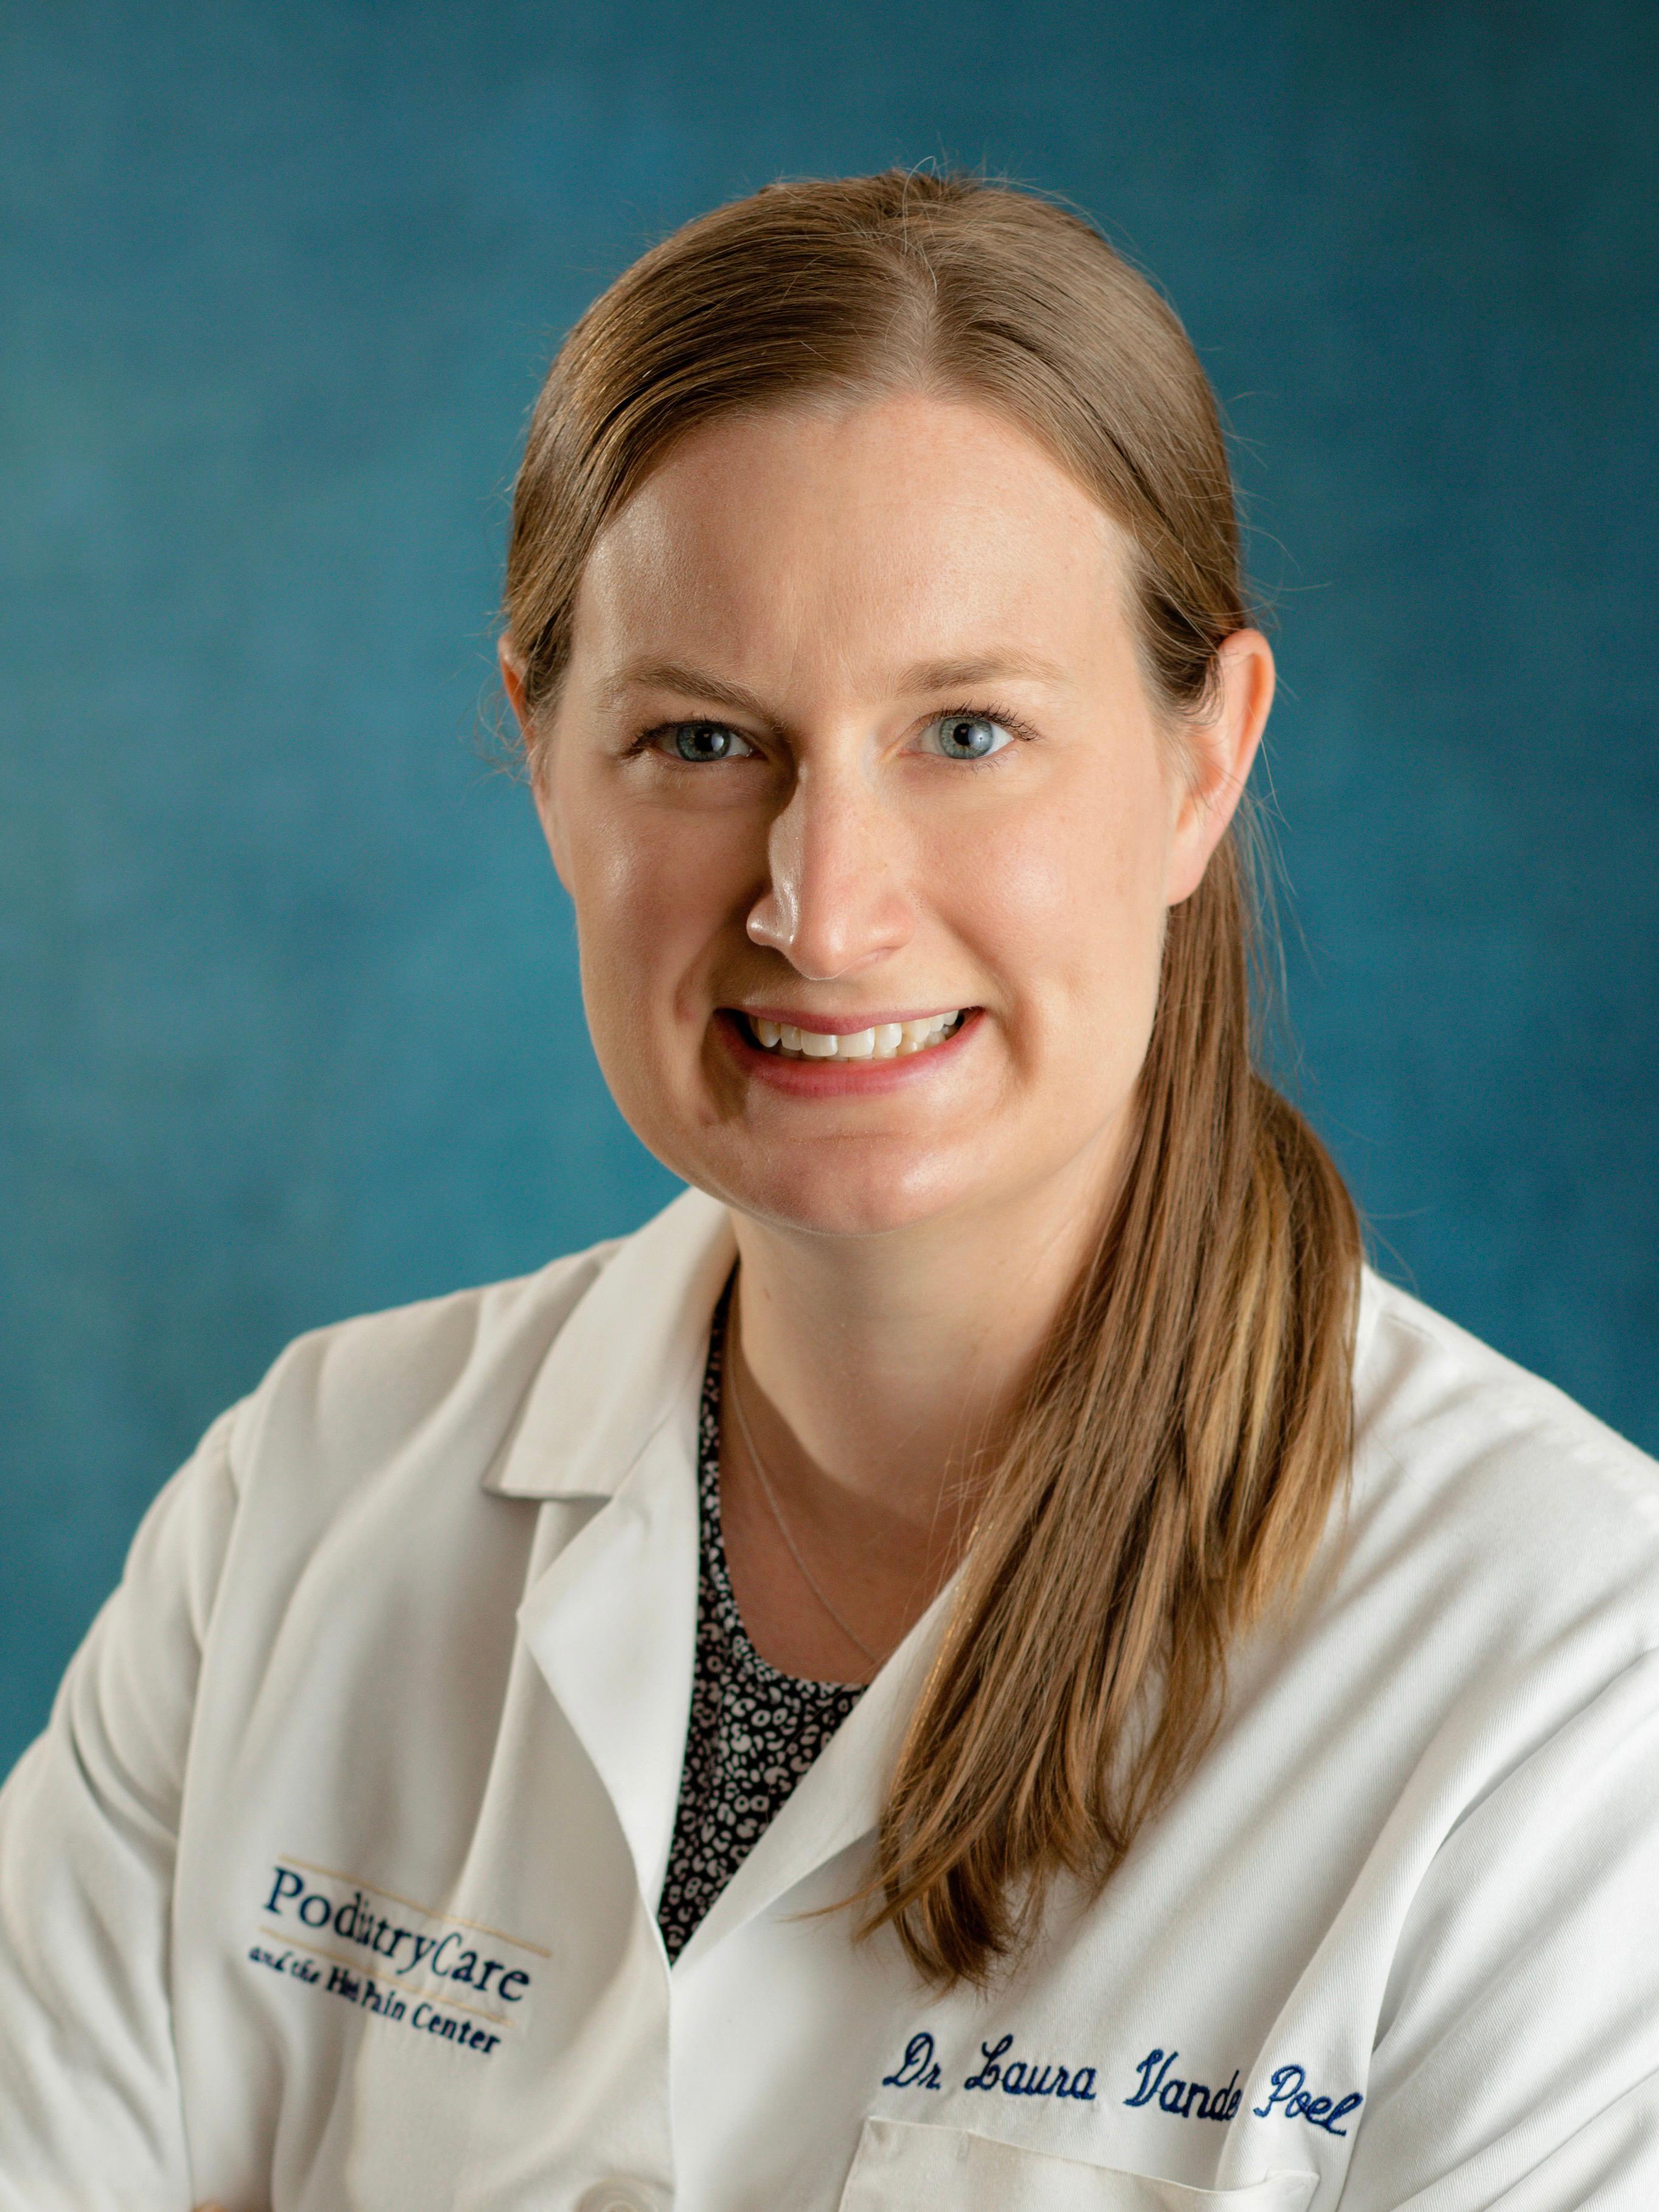 Laura Vander Poel, DPM PodiatryCare, PC and the Heel Pain Center Enfield (860)741-3041